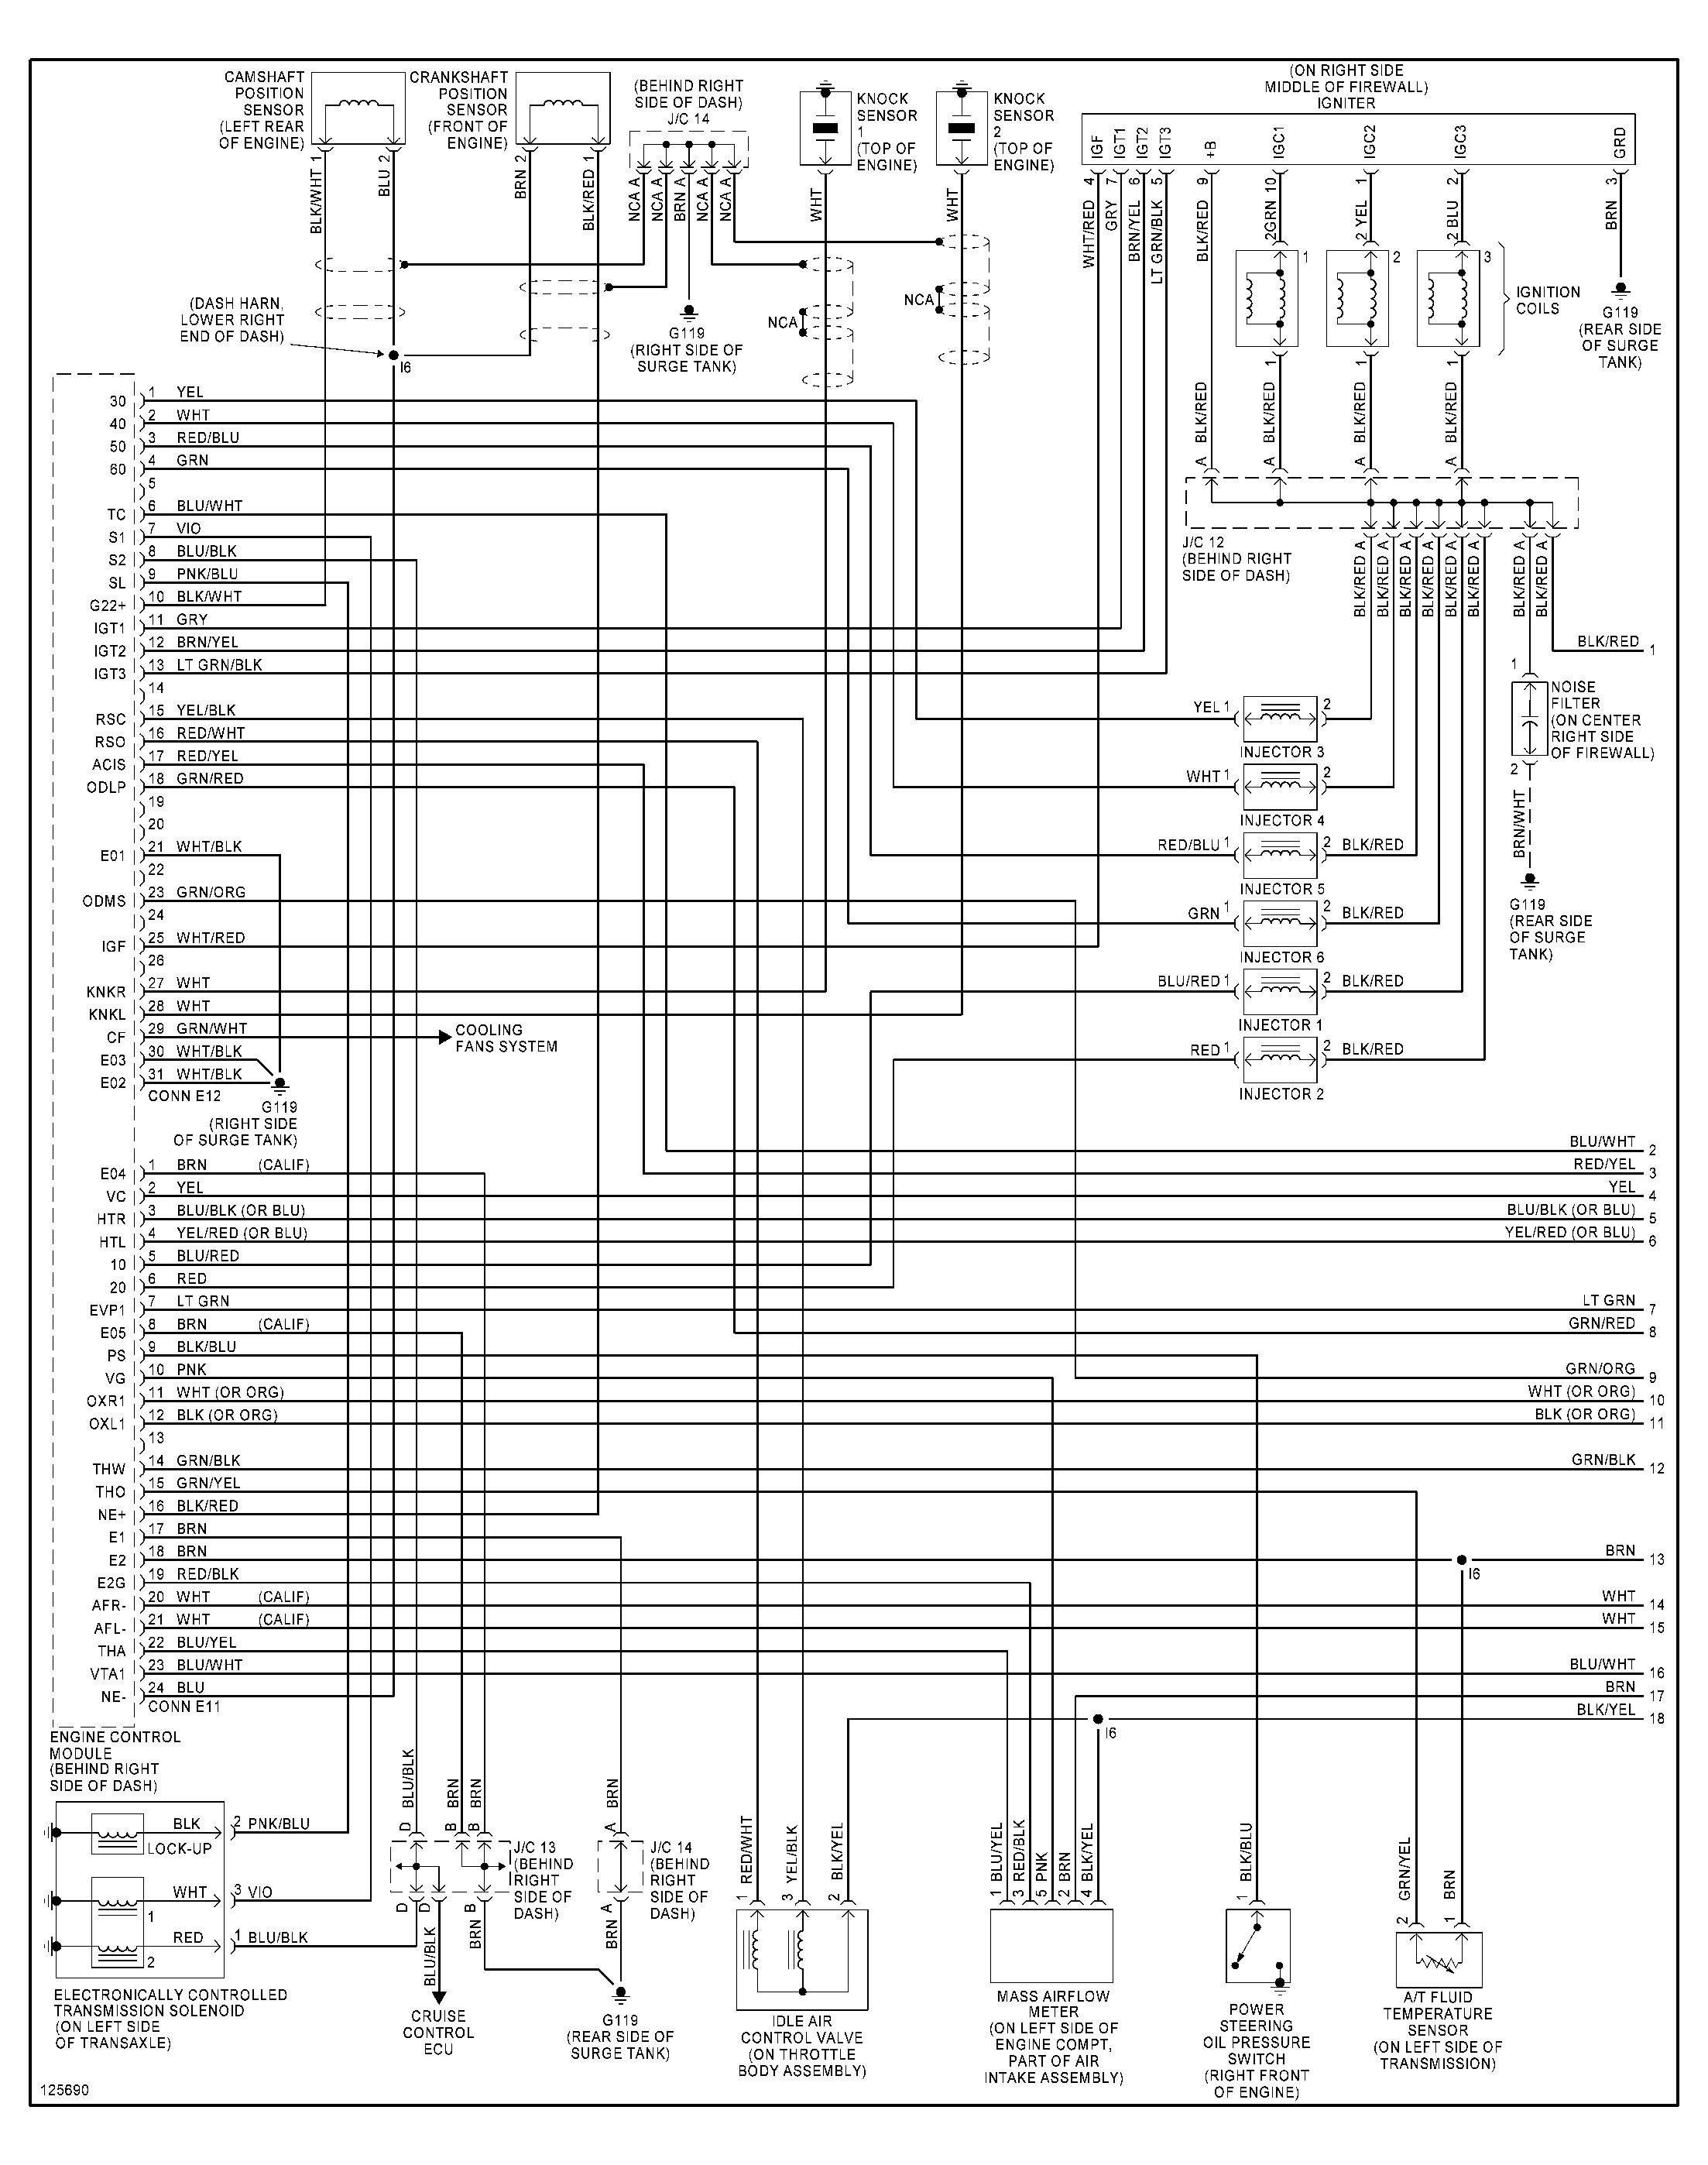 2003 toyota Camry Engine Diagram Awesome toyota Radio Wiring Everything You Need to Know Of 2003 toyota Camry Engine Diagram